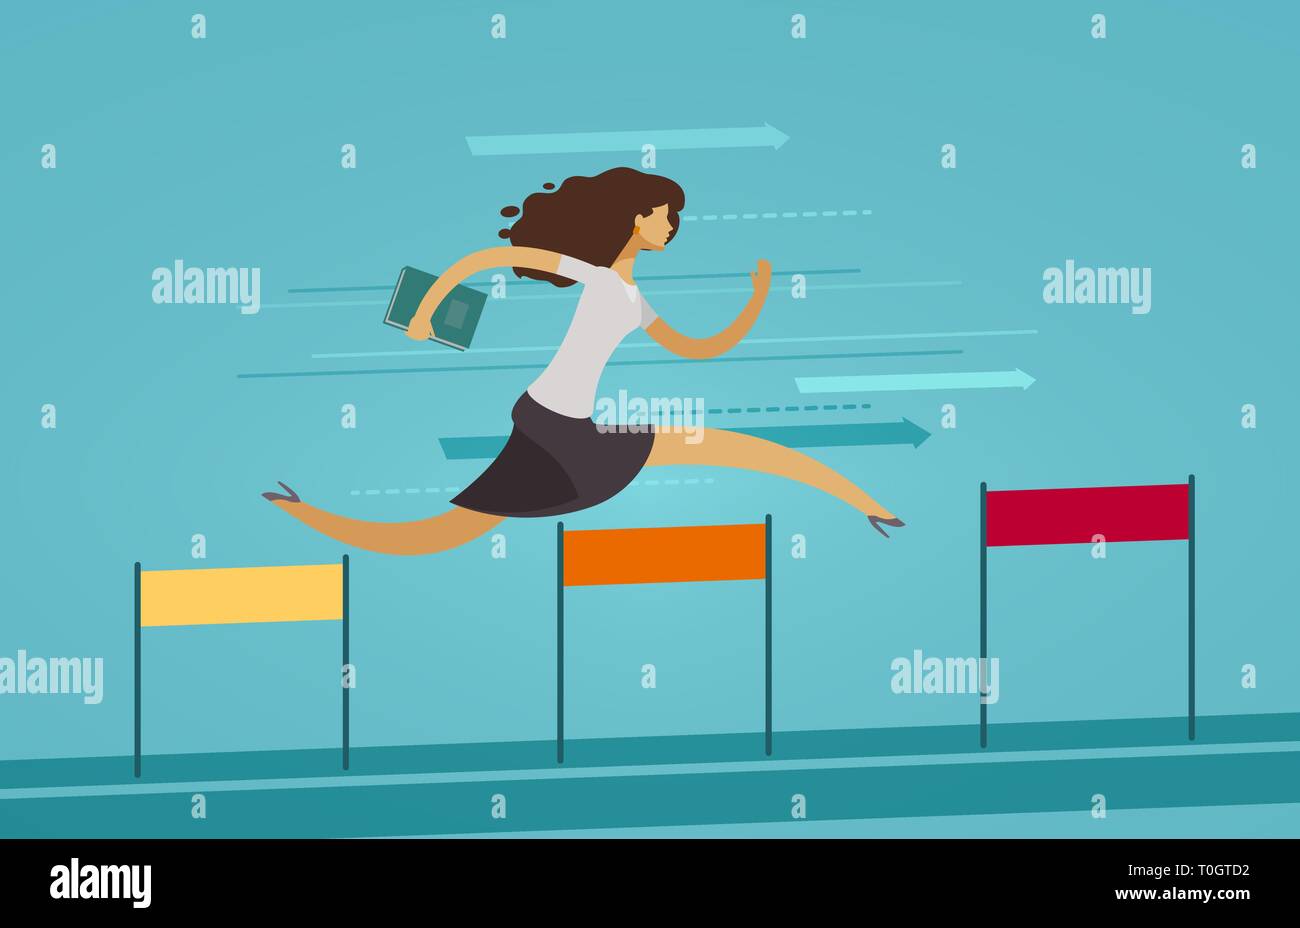 Businesswoman runs on obstacle course. Business concept. Vector illustration Stock Vector